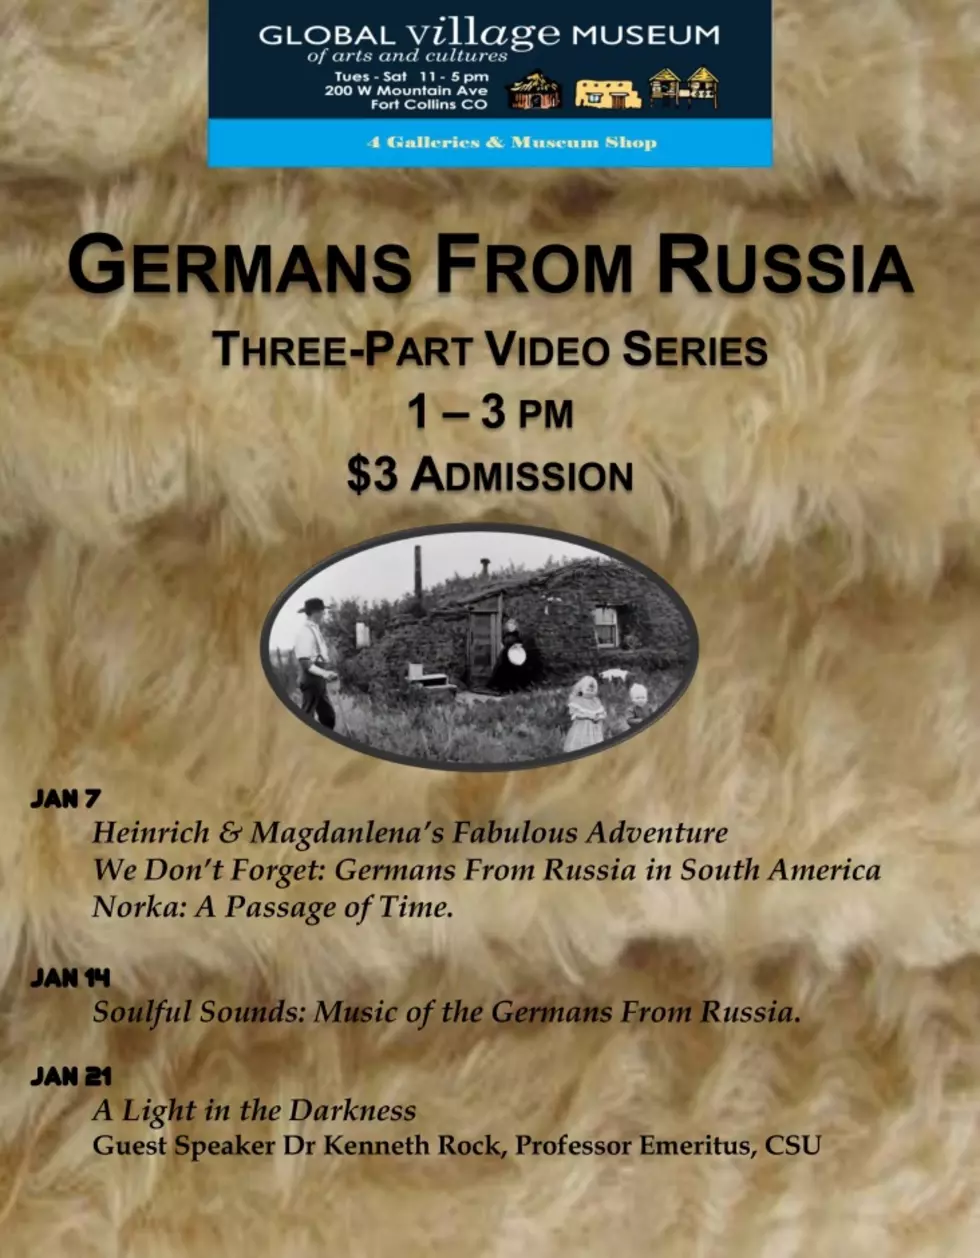 Germans From Russia Video Series Part 2